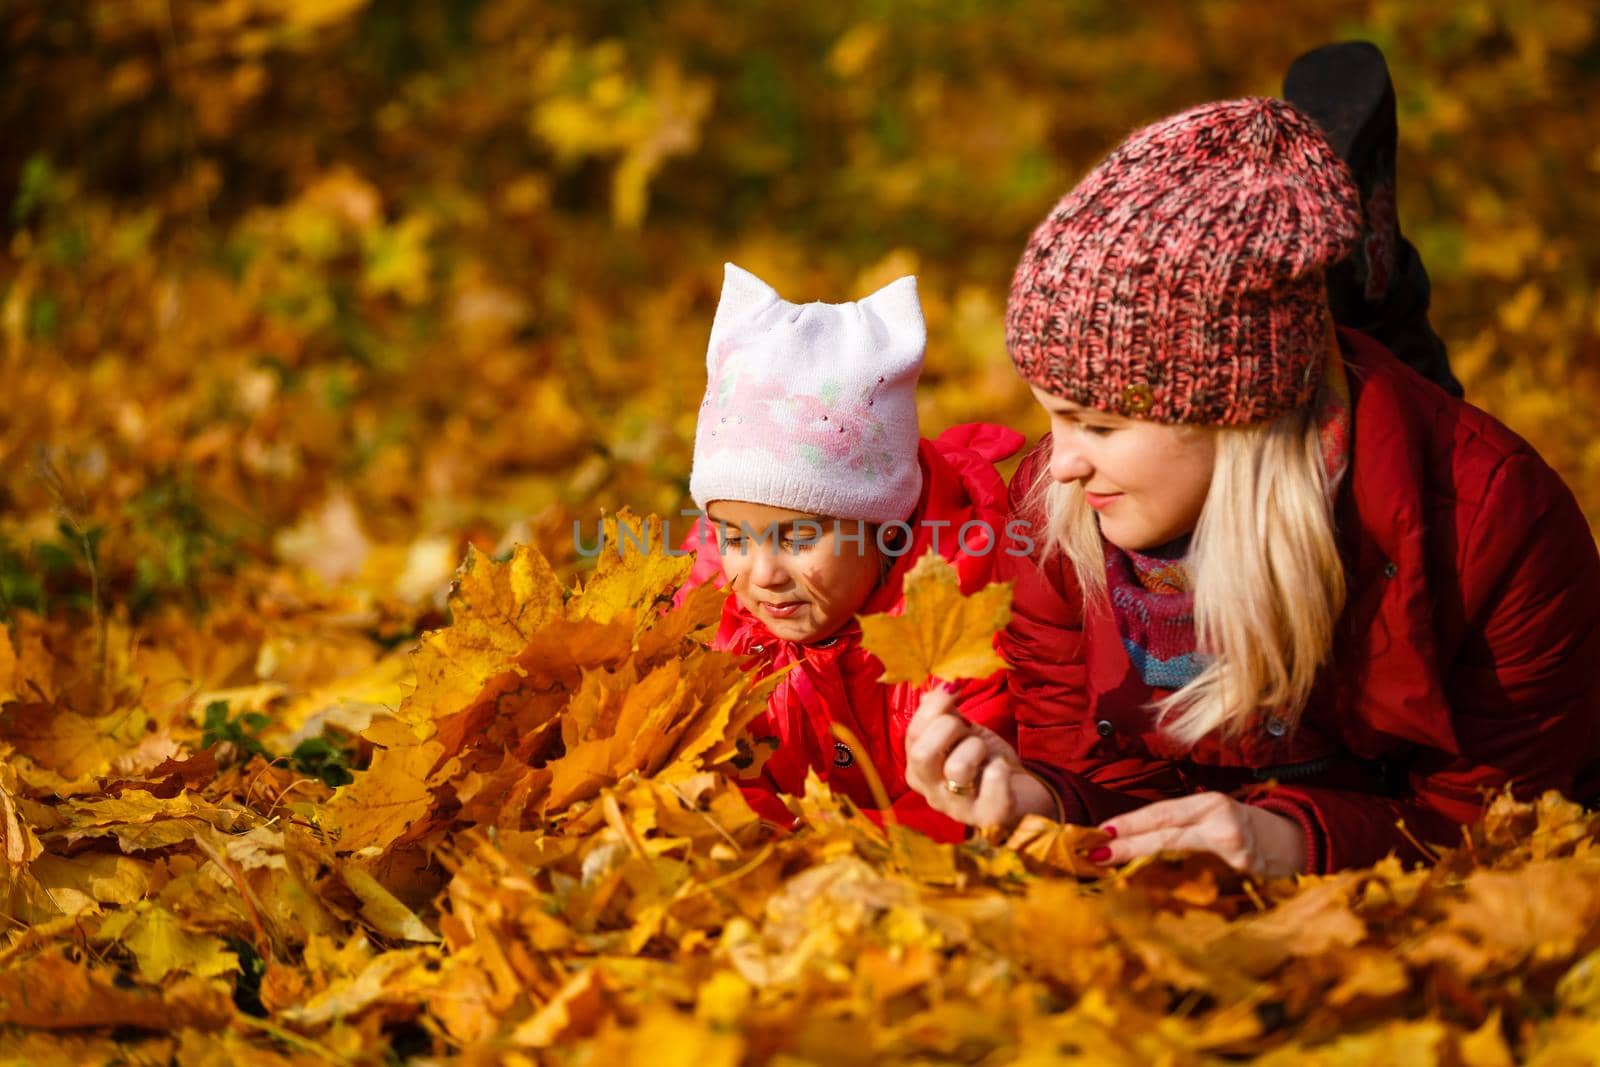 Mother and daughter having fun in the autumn park among the falling leaves. by Andelov13